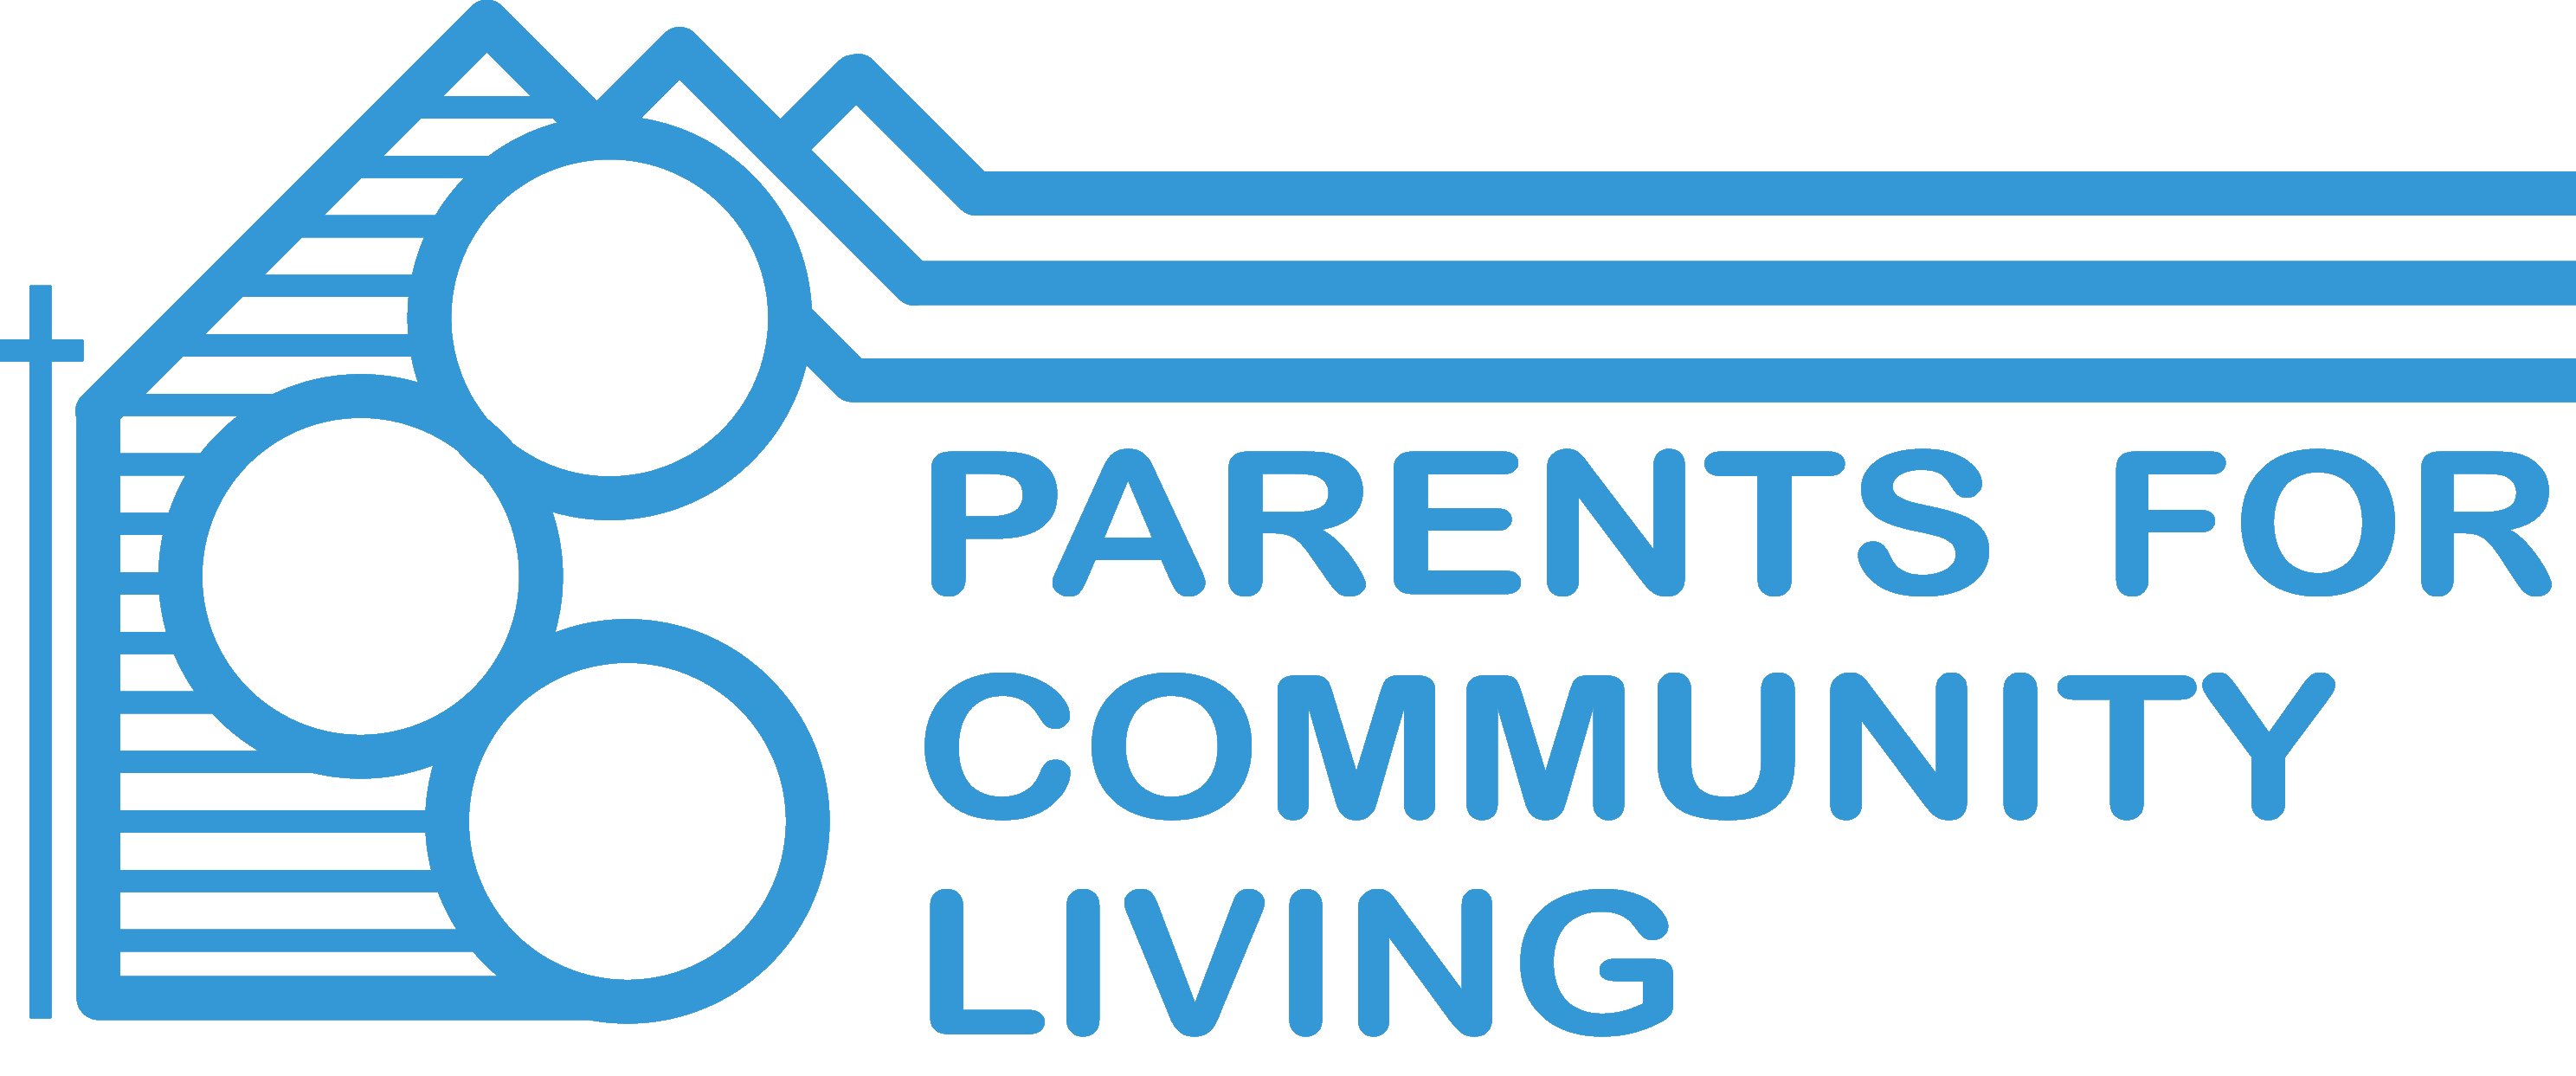 Showcase Image for Parents for Community Living KW